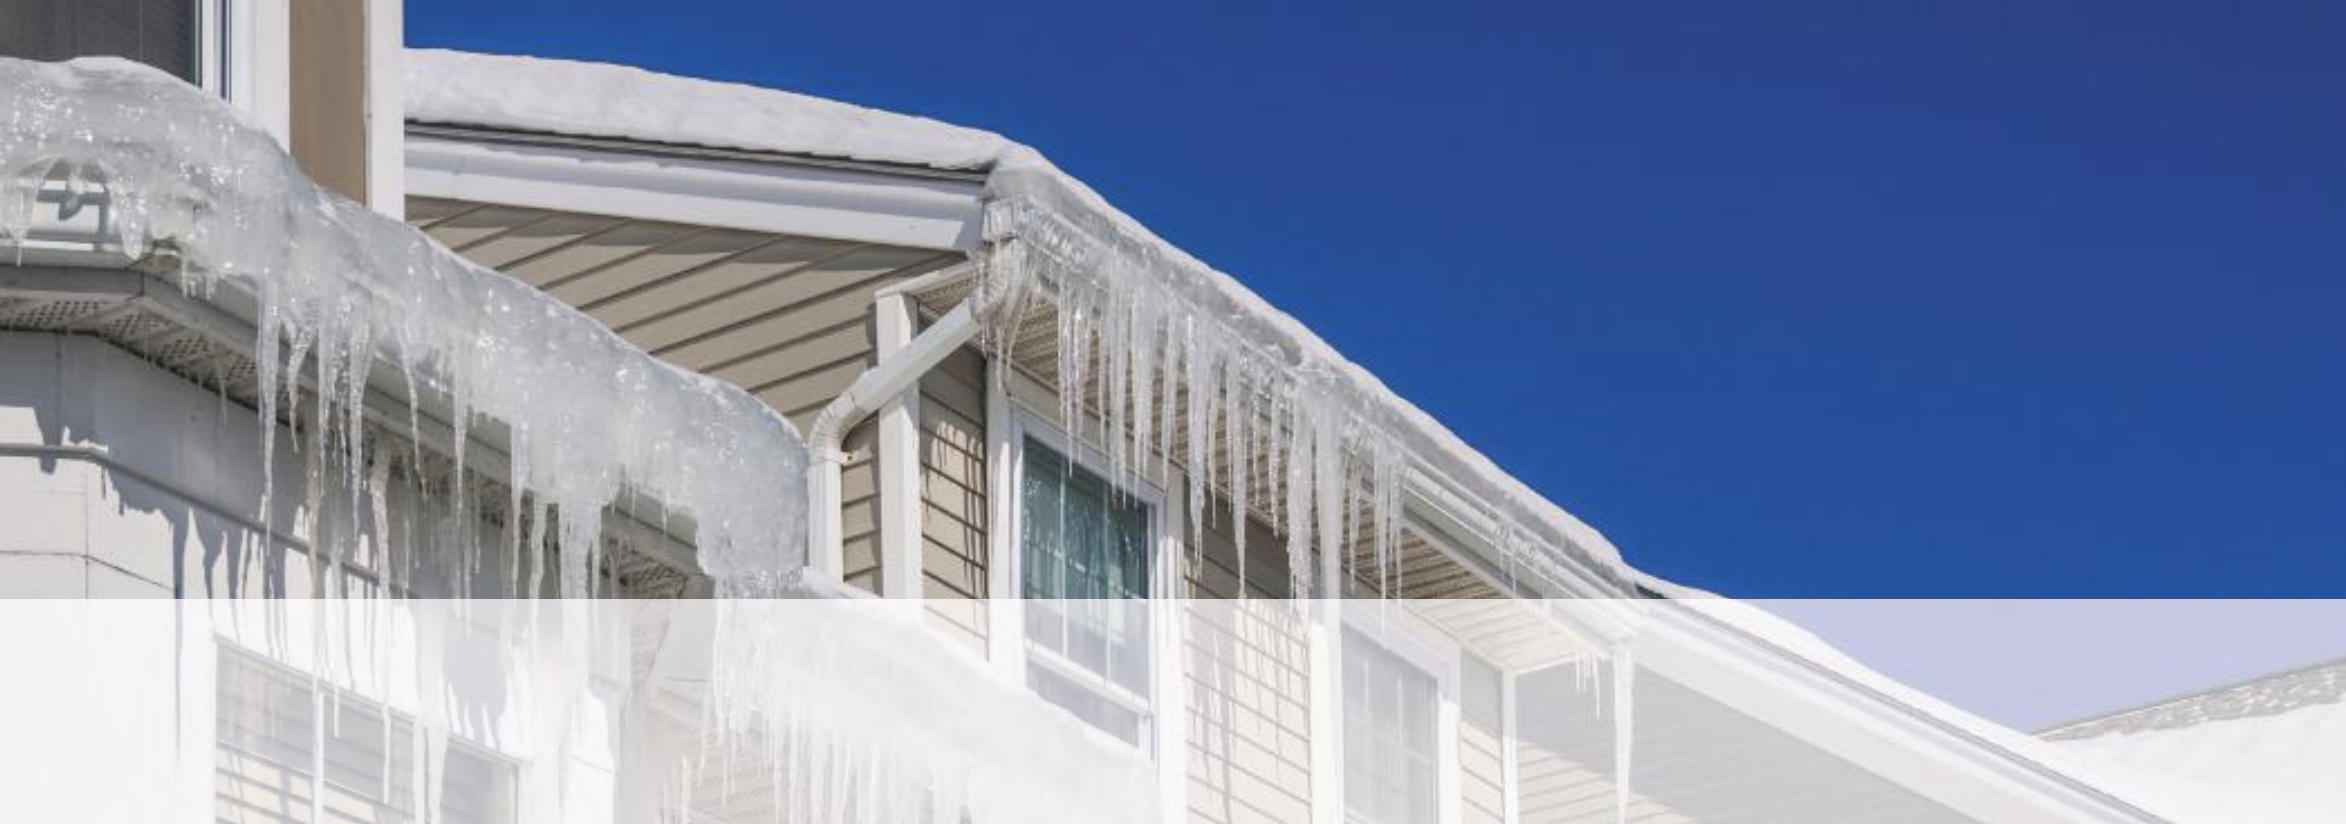 ice damming on home in Colorado